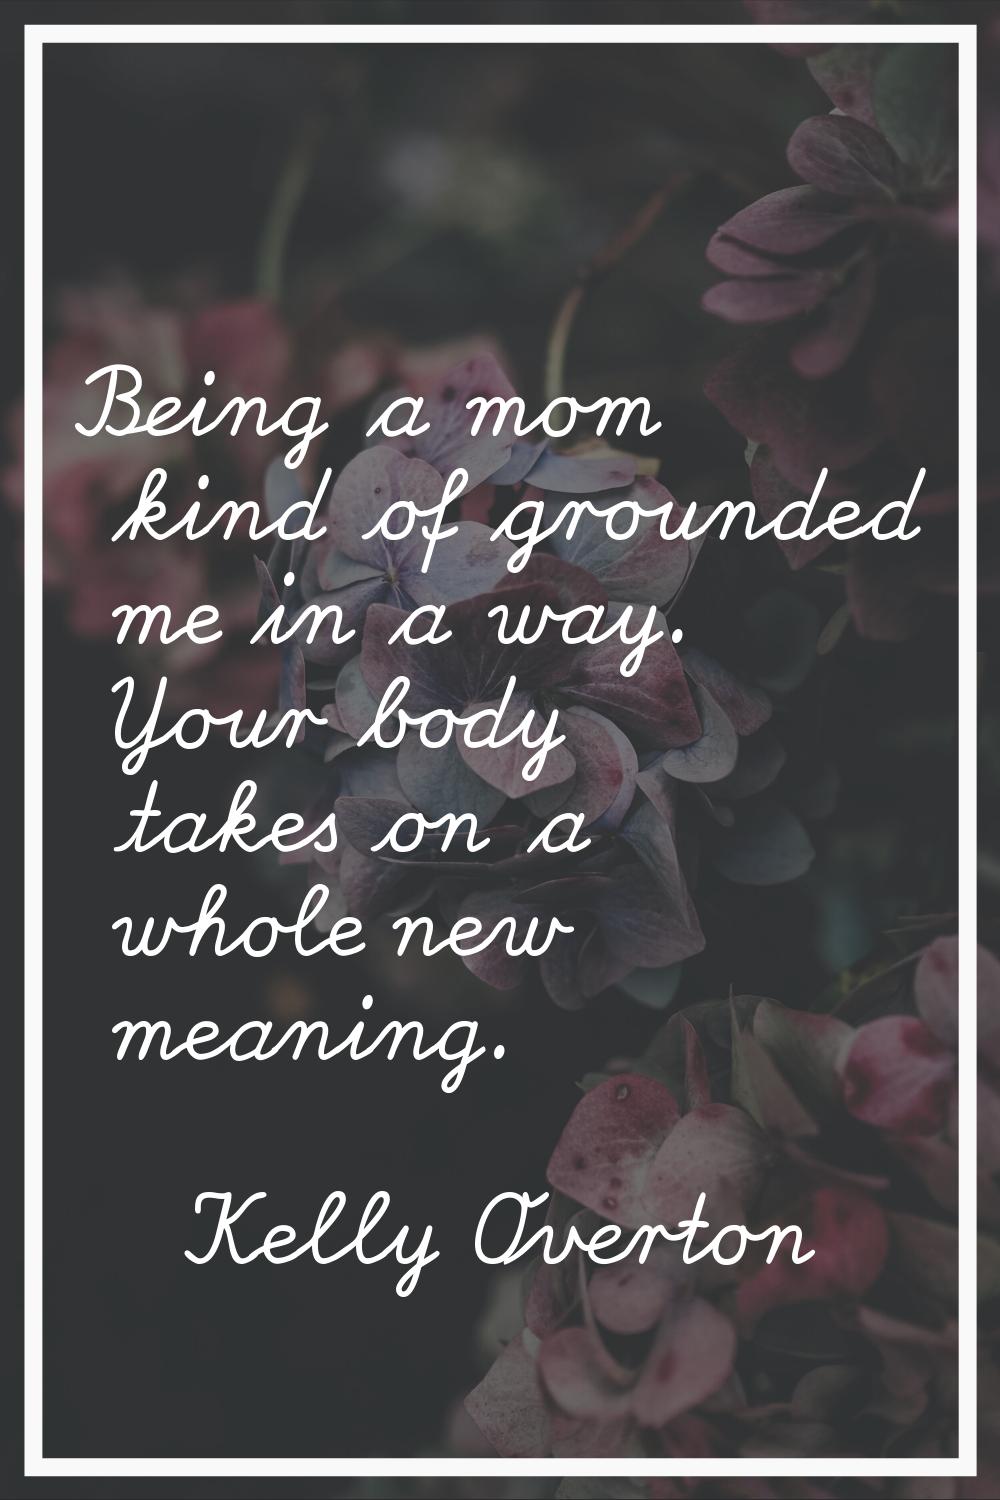 Being a mom kind of grounded me in a way. Your body takes on a whole new meaning.